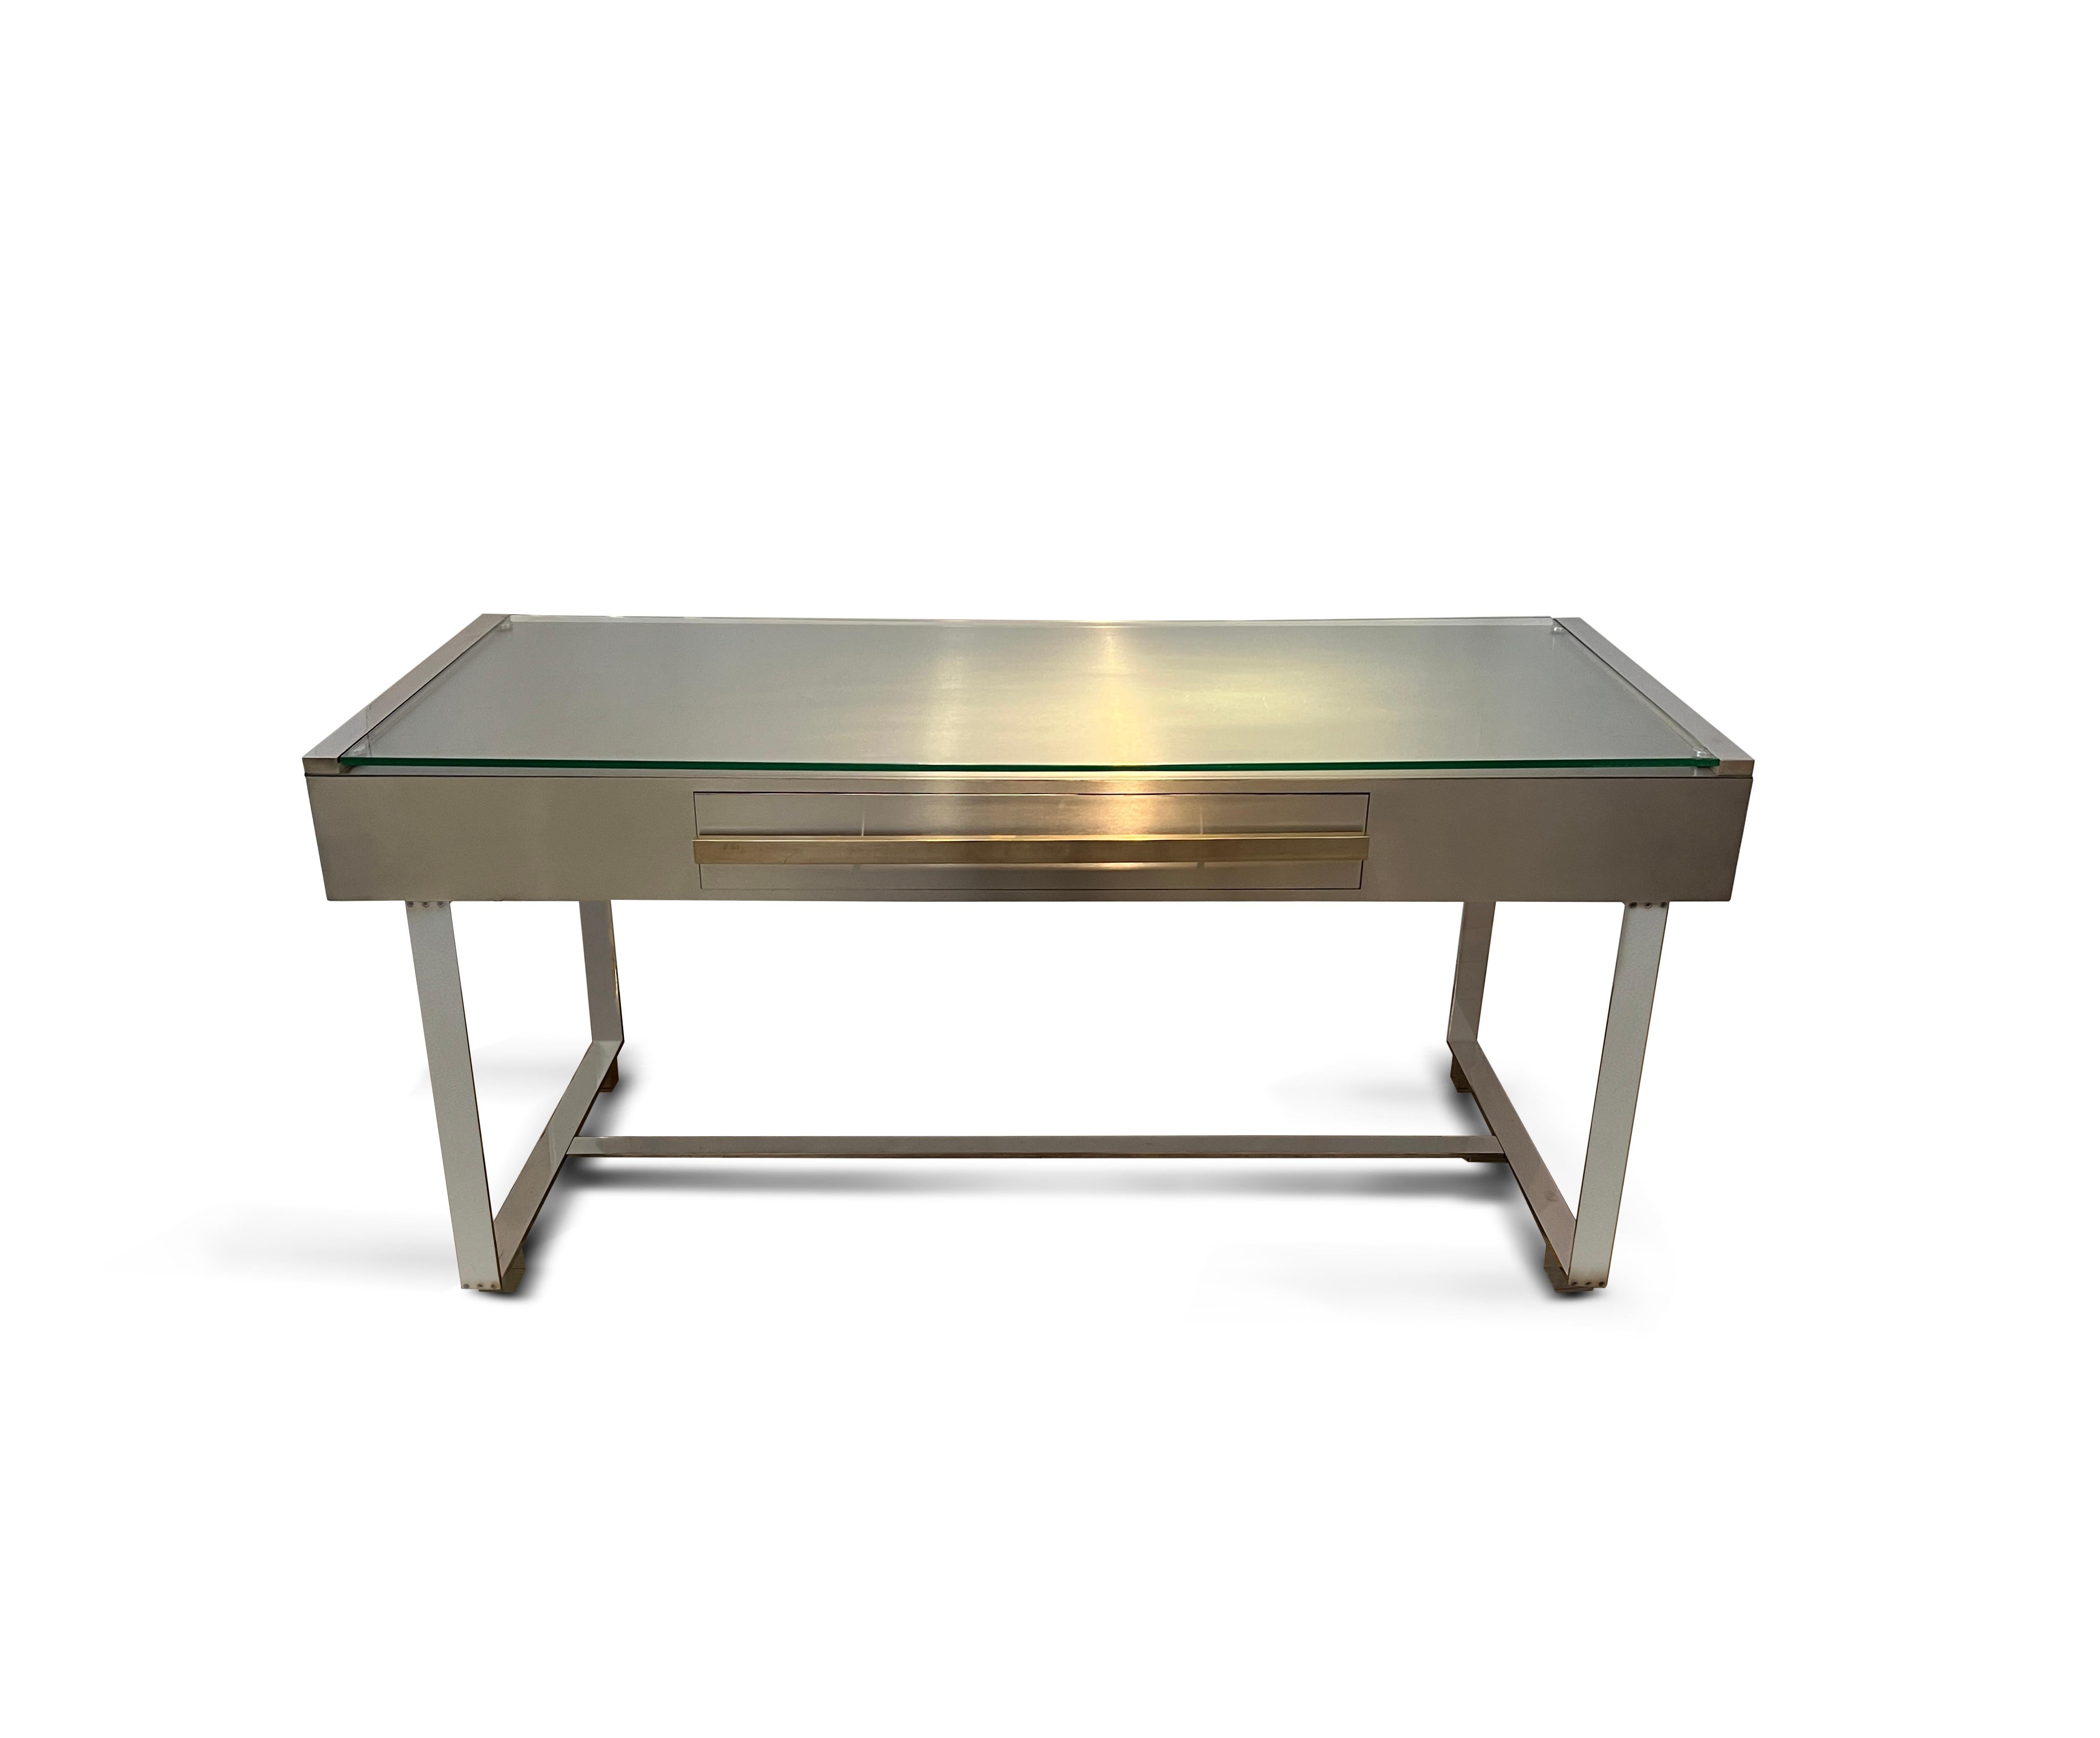 For Cohray
An extremely handsome brushed and polished steel desk with clean lines, the drawer pull with pale, subtle brass finish. Hemispherical steel sections support the 10mm glass top.
Two extending panels left and right ends (each extending a